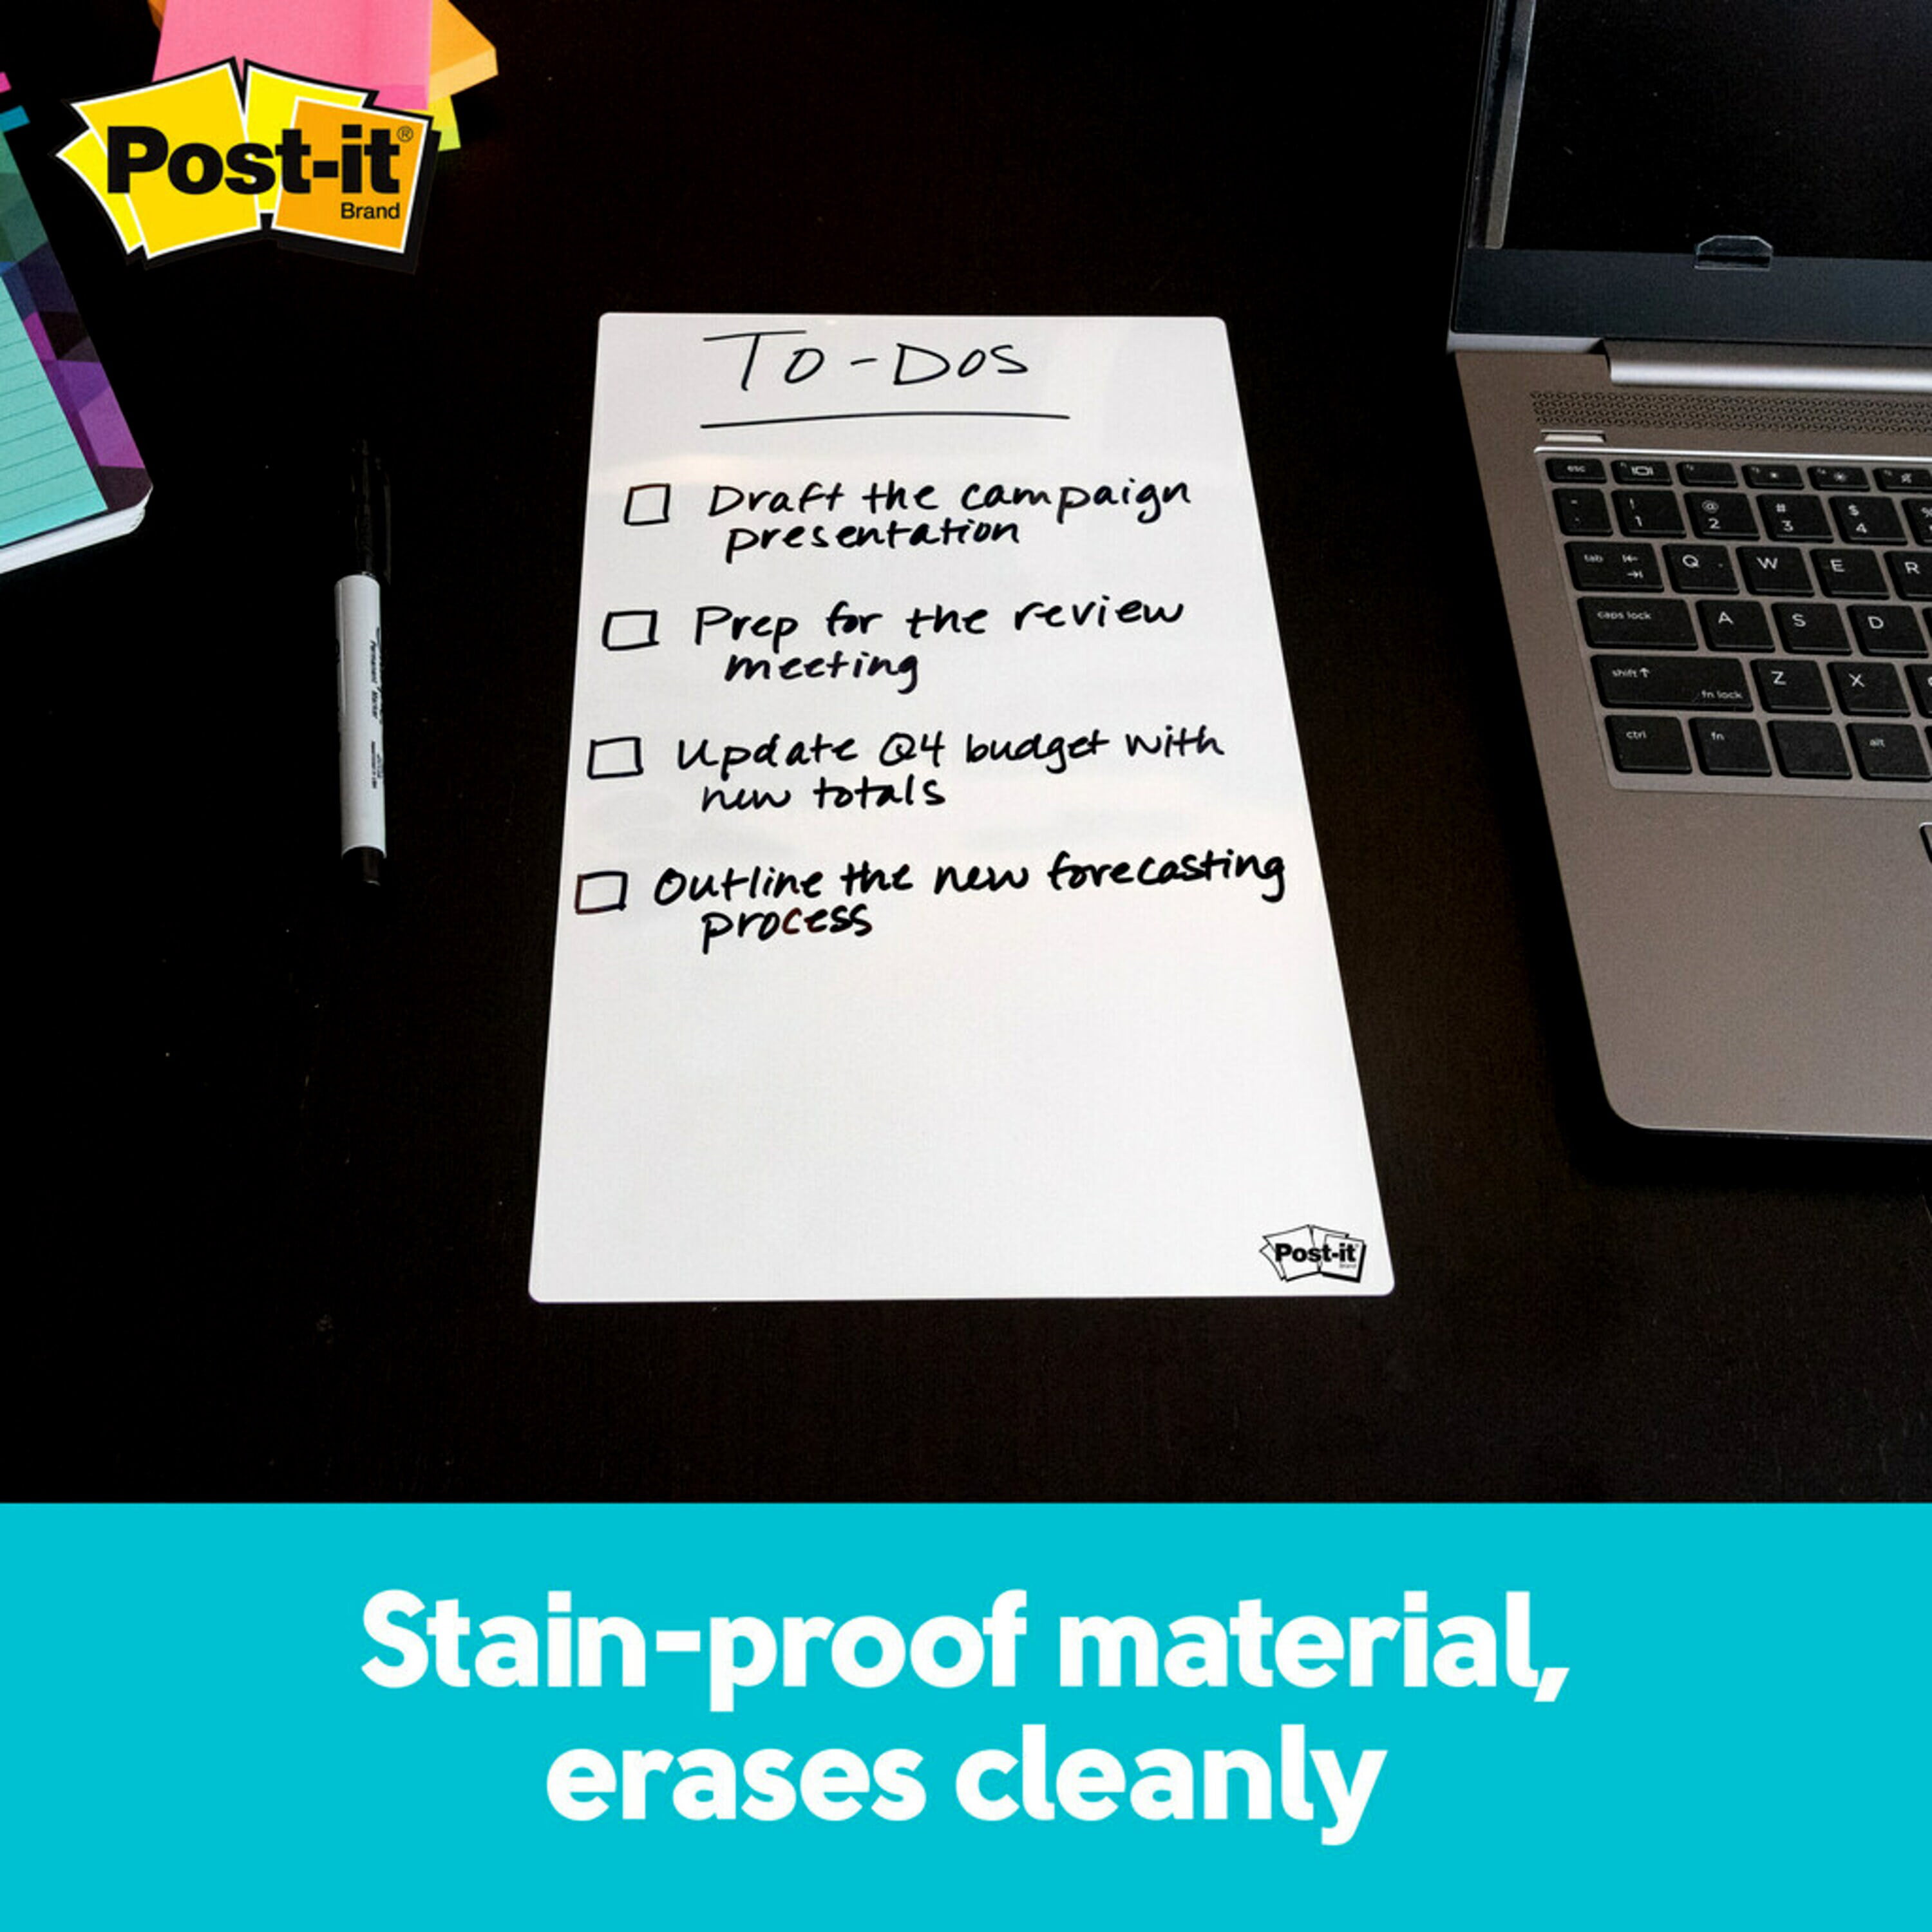 Dry Erase Clear Adhesive Sheet - Letter Size: StoreSMART - Filing,  Organizing, and Display for Office, School, Warehouse, and Home